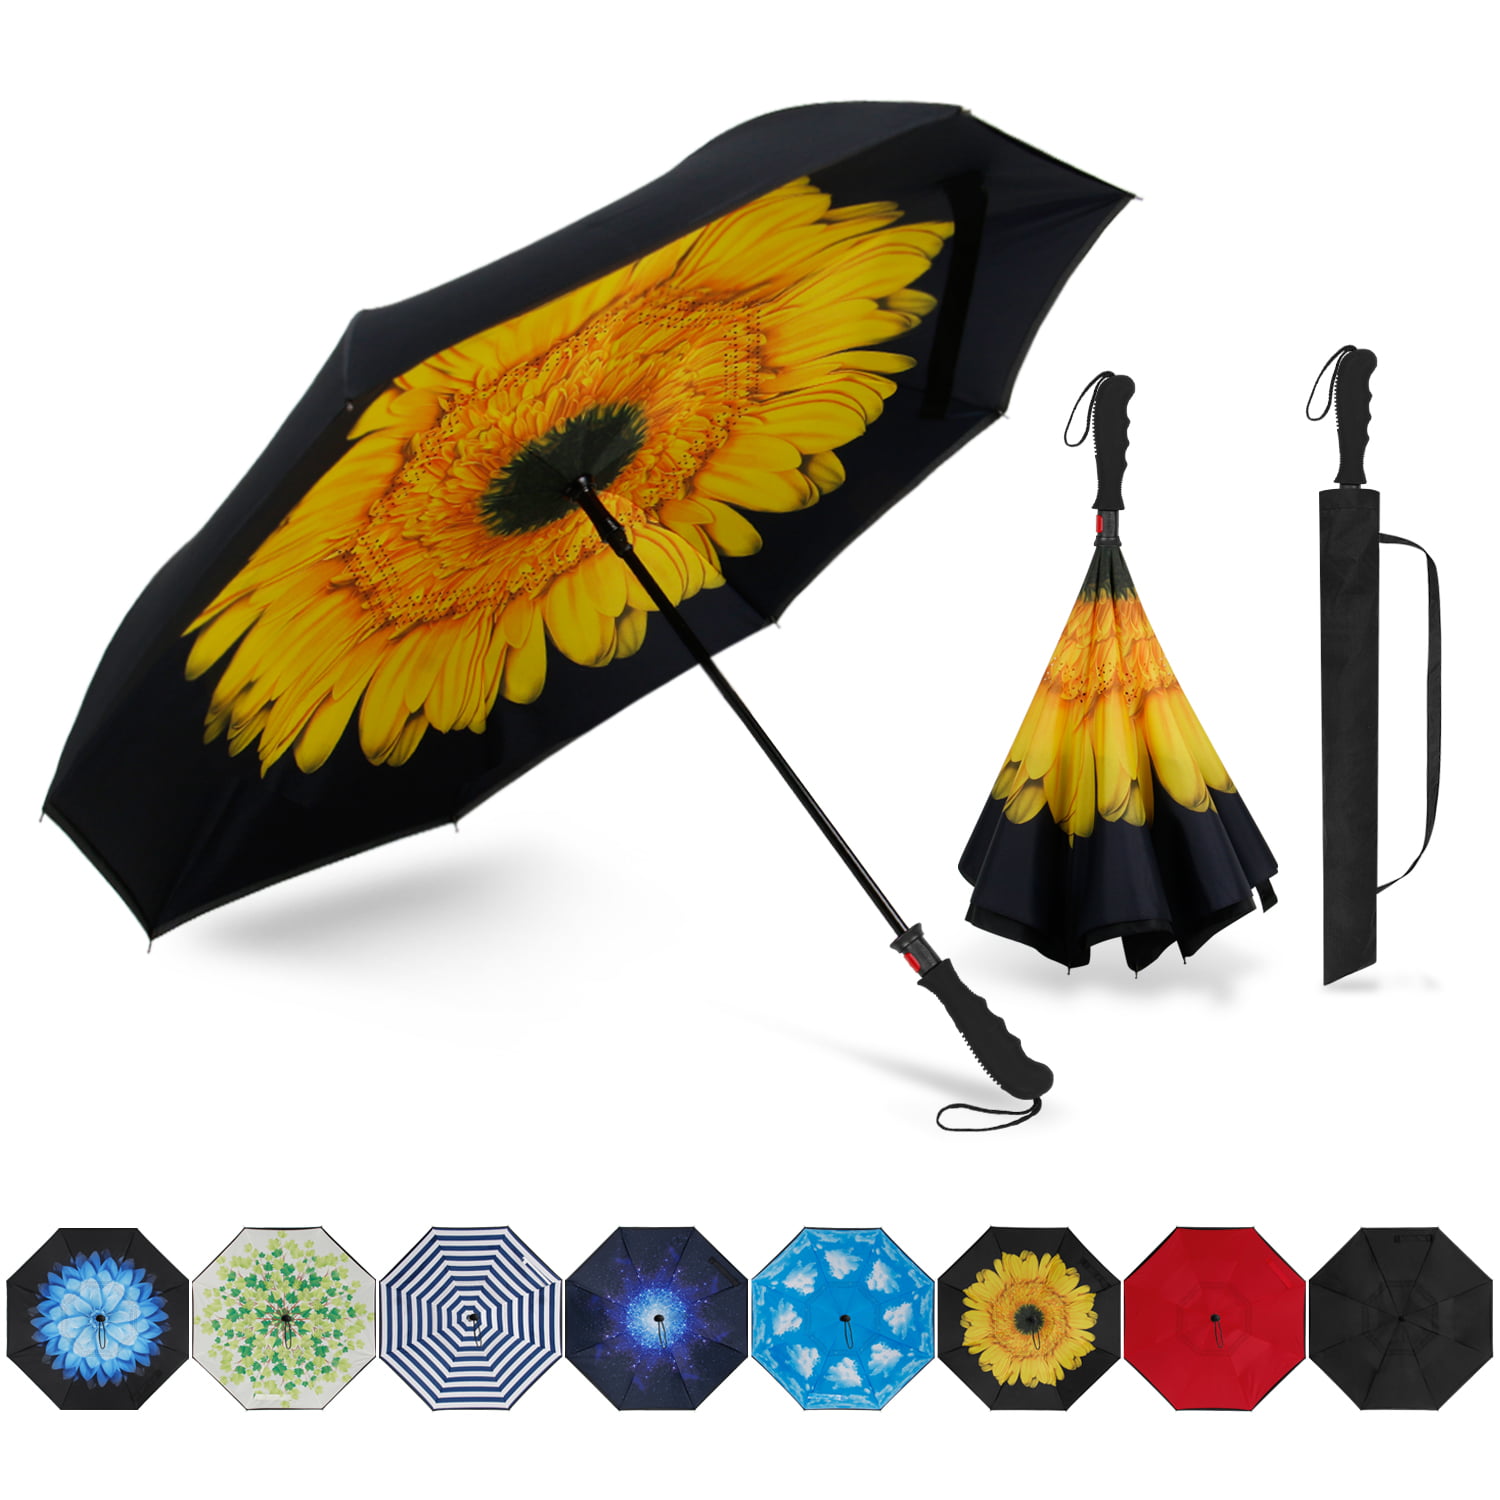 FUNTRESS Windproof Compact Umbrella For Woman,UV Protection Car Umbrella ，Big Stick Upside Down Umbrella with Double Layer Canopy Cherry Blossoms 